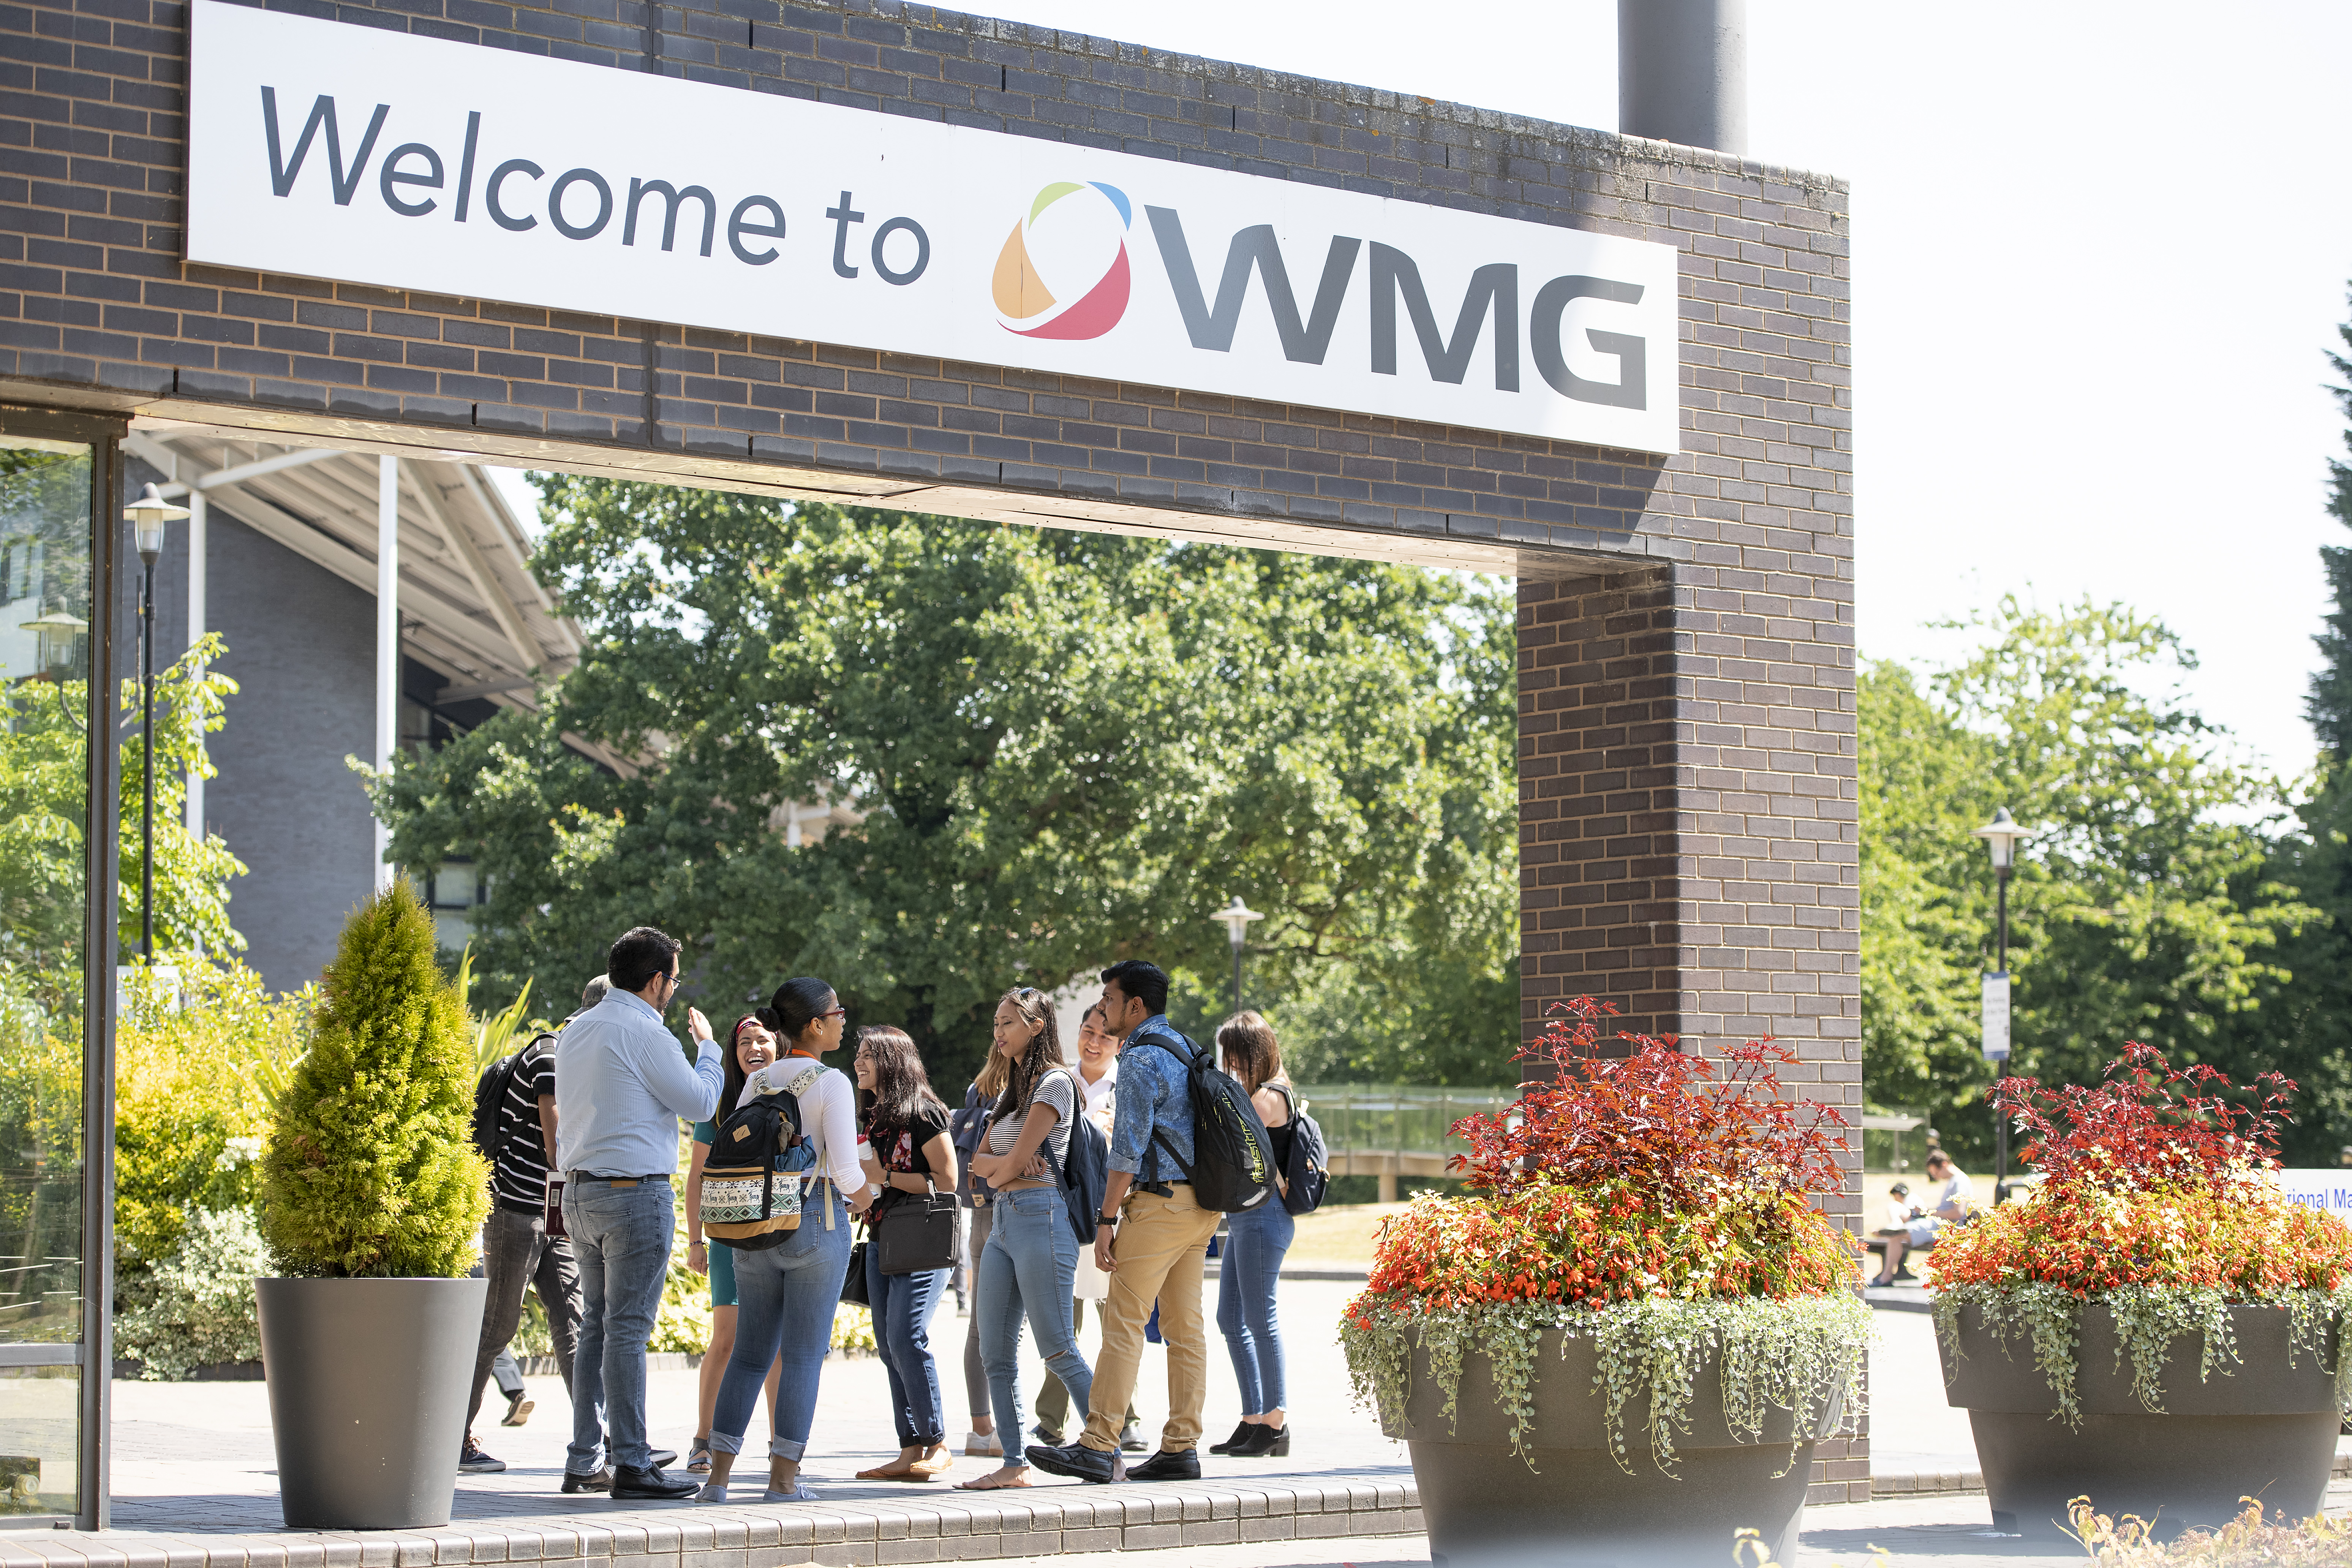 A group of WMG students standing outside a building with WMG sign